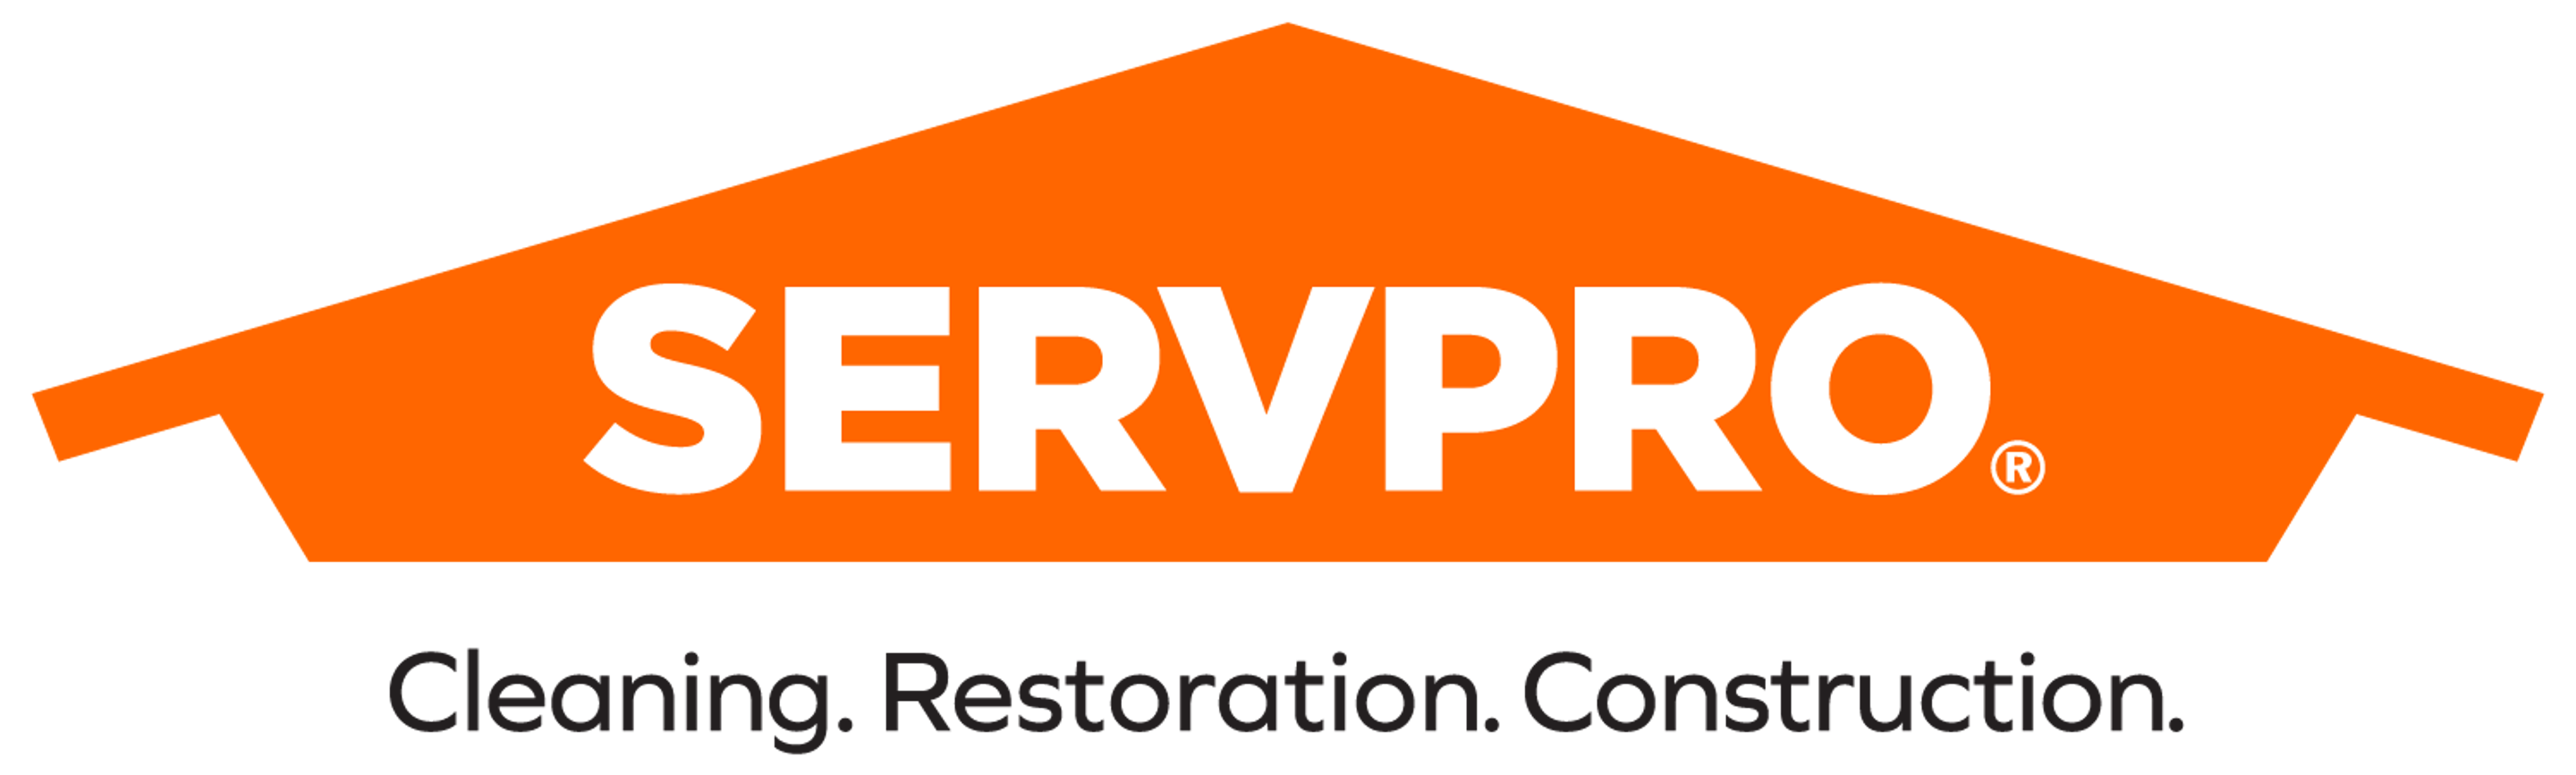 SERVPRO Launches New Advertising Campaign to Reinforce Leadership